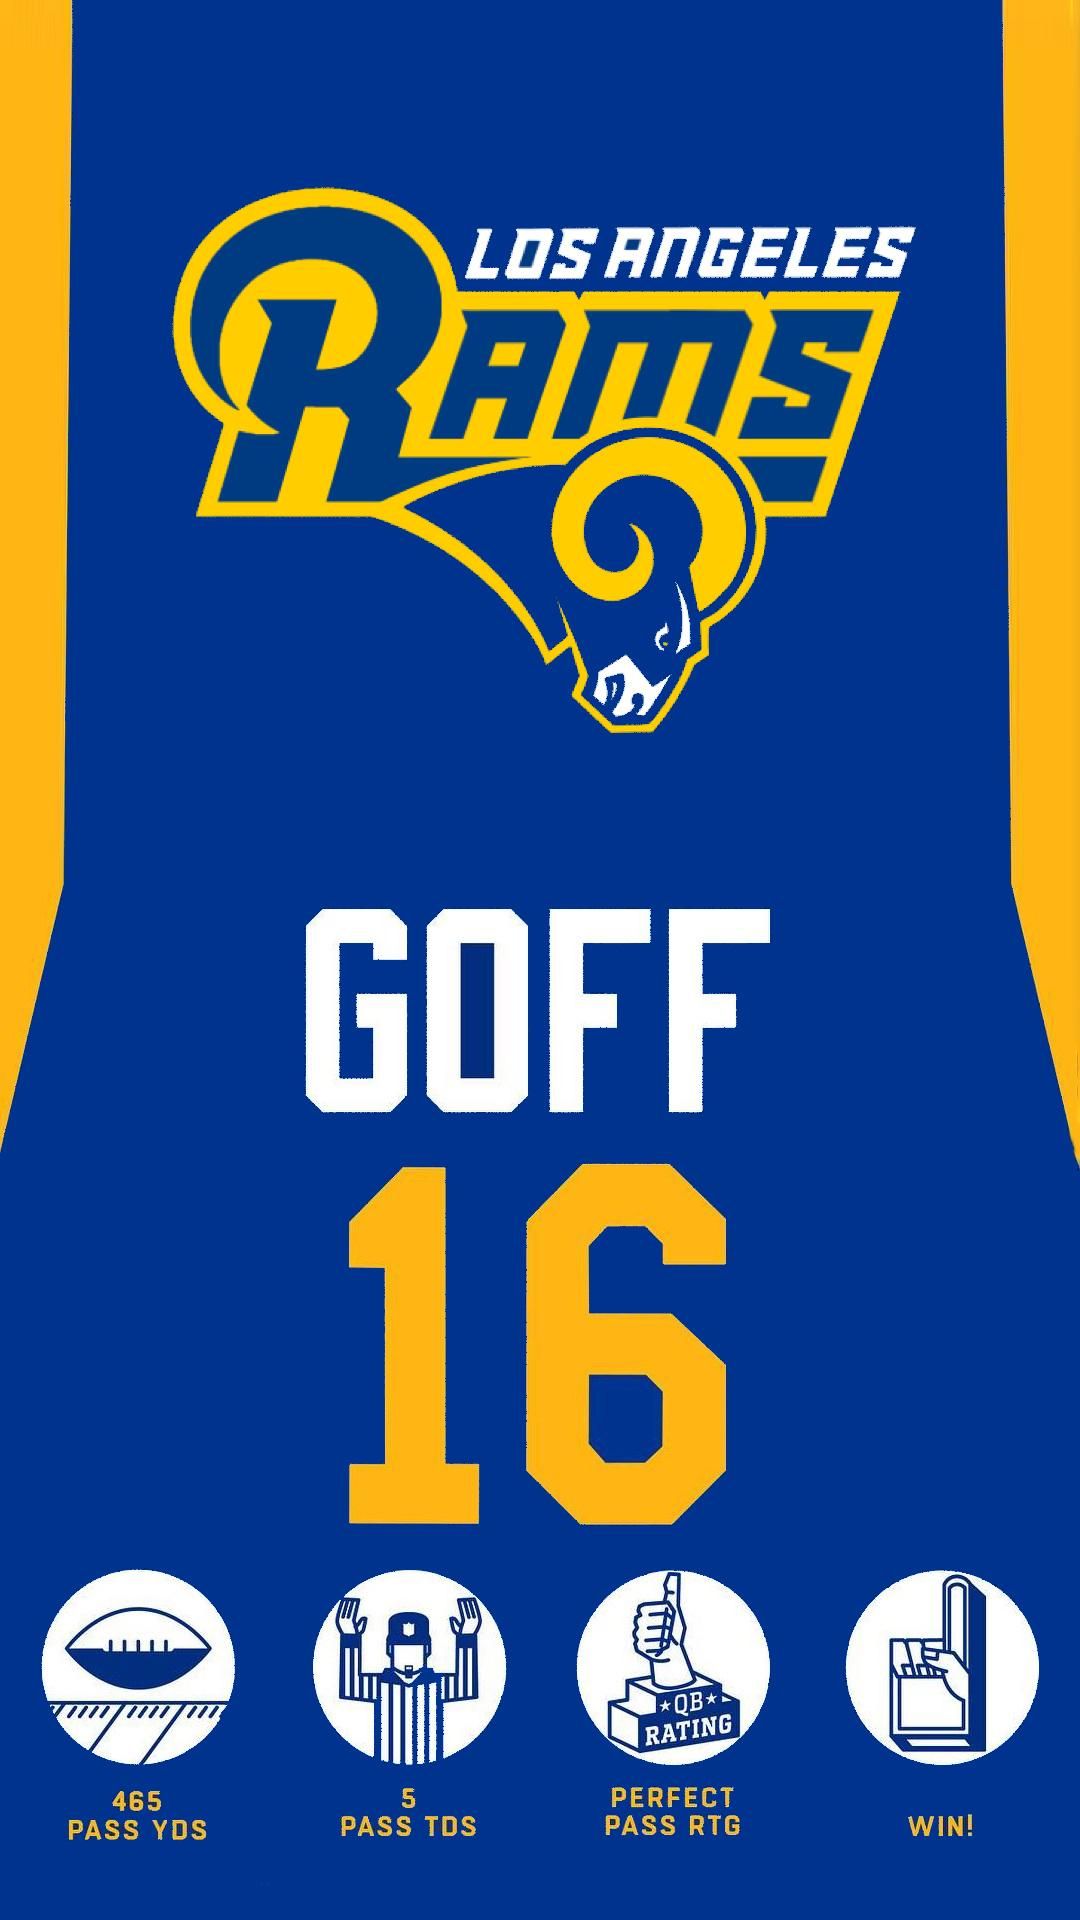 Jared Goff Wallpapers